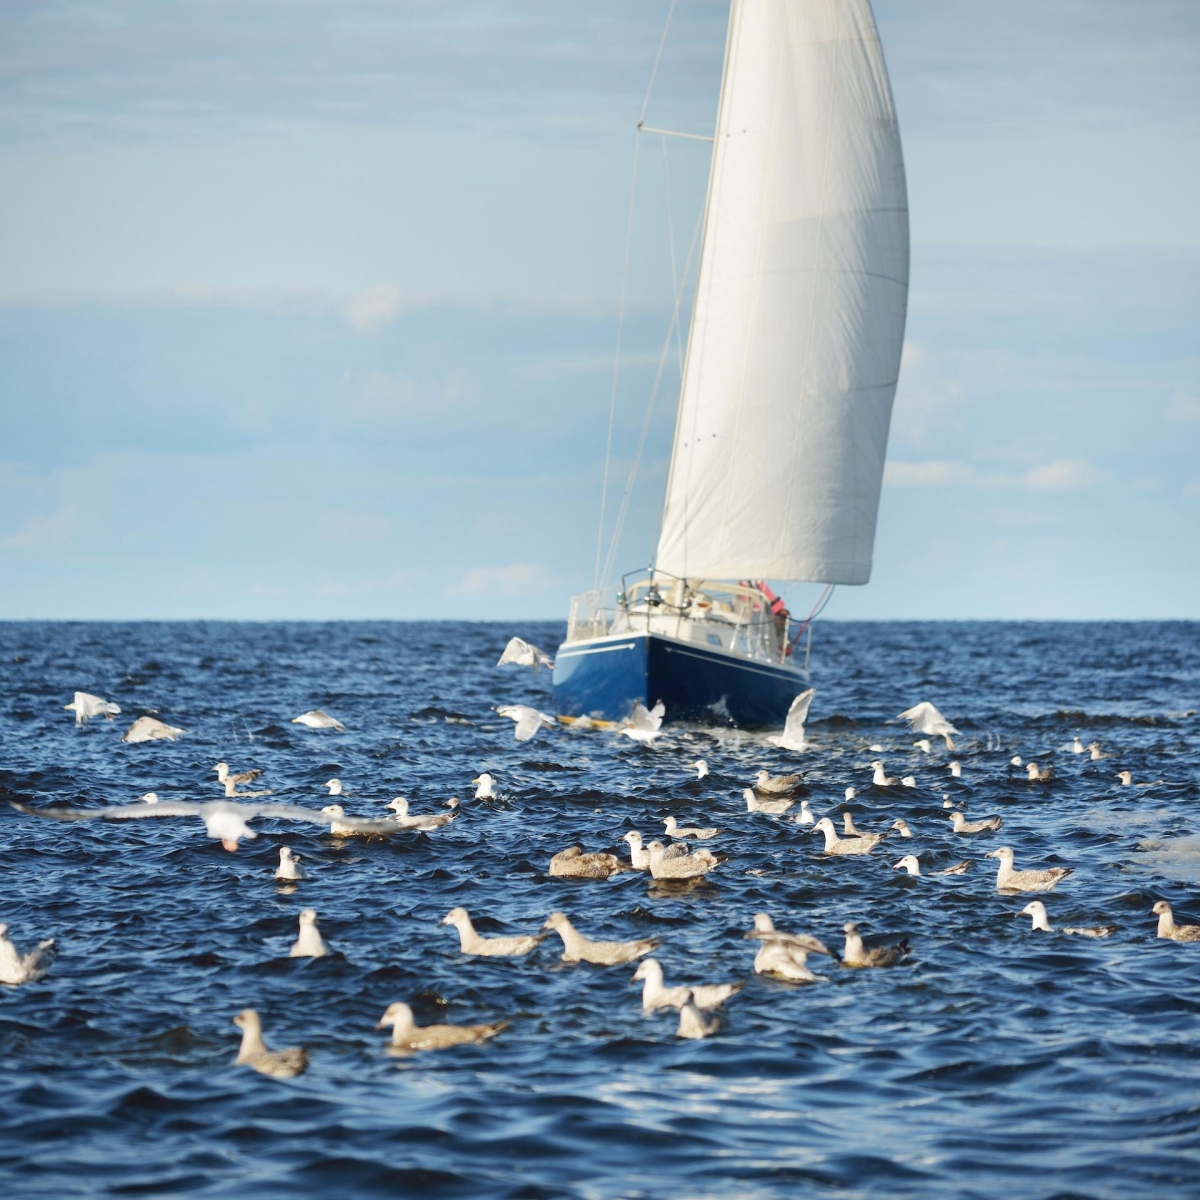 Blue sloop rigged yacht sailing in an open Baltic sea on a clear day, flying seagulls close-up. Riga bay, Latvia